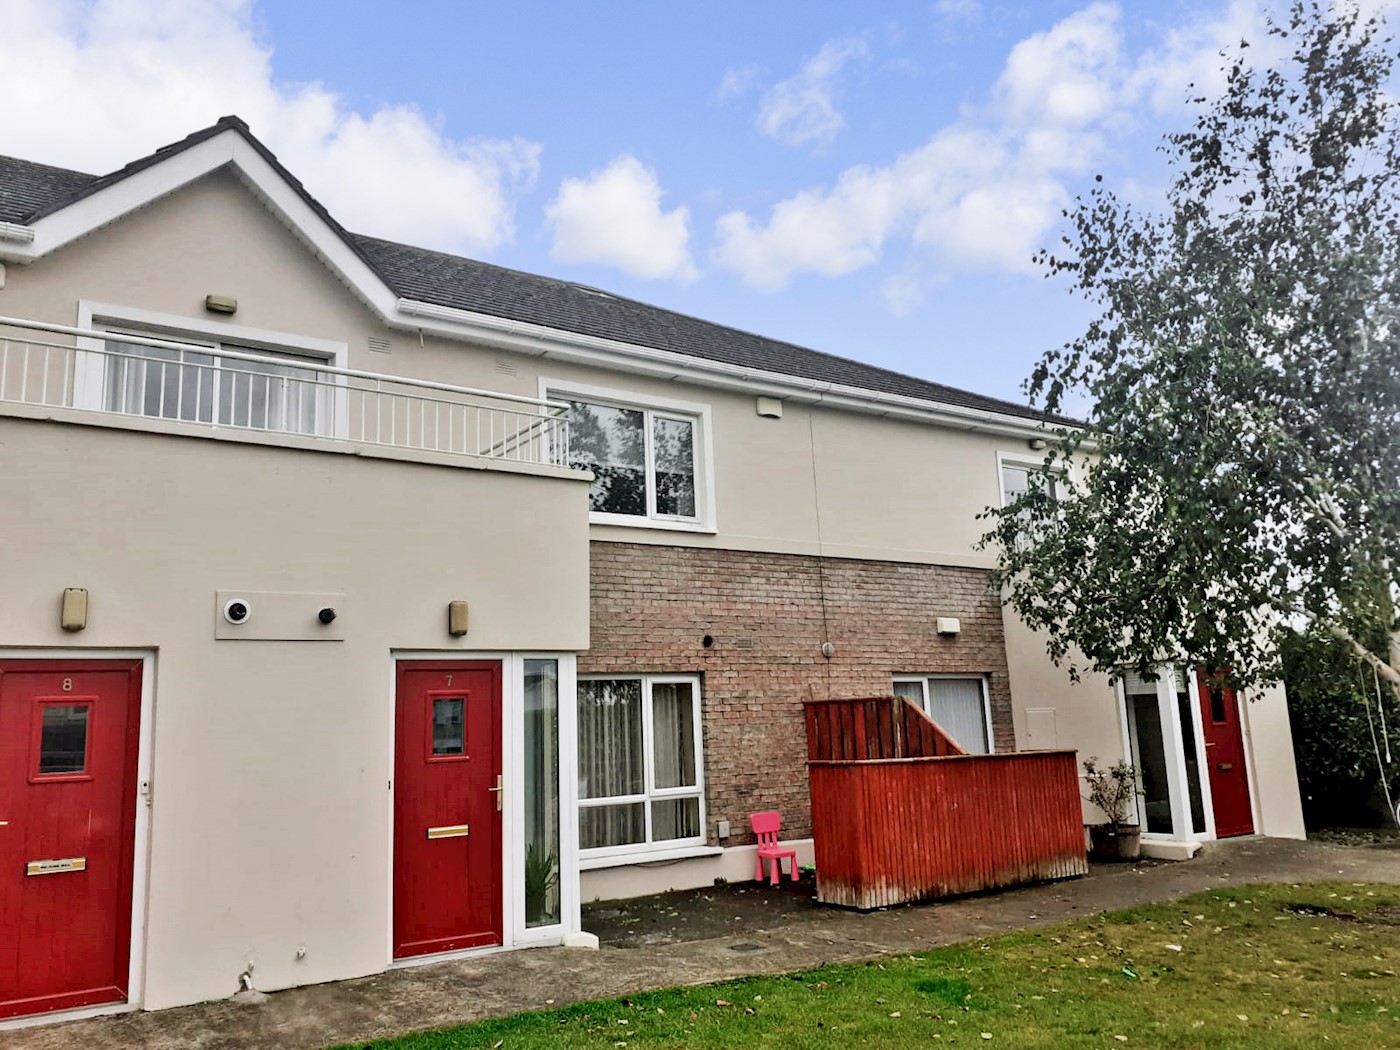 Apartment 7, The Pines, Fairyhouse Road, Ratoath, Co. Meath, A85 XC80 1/3